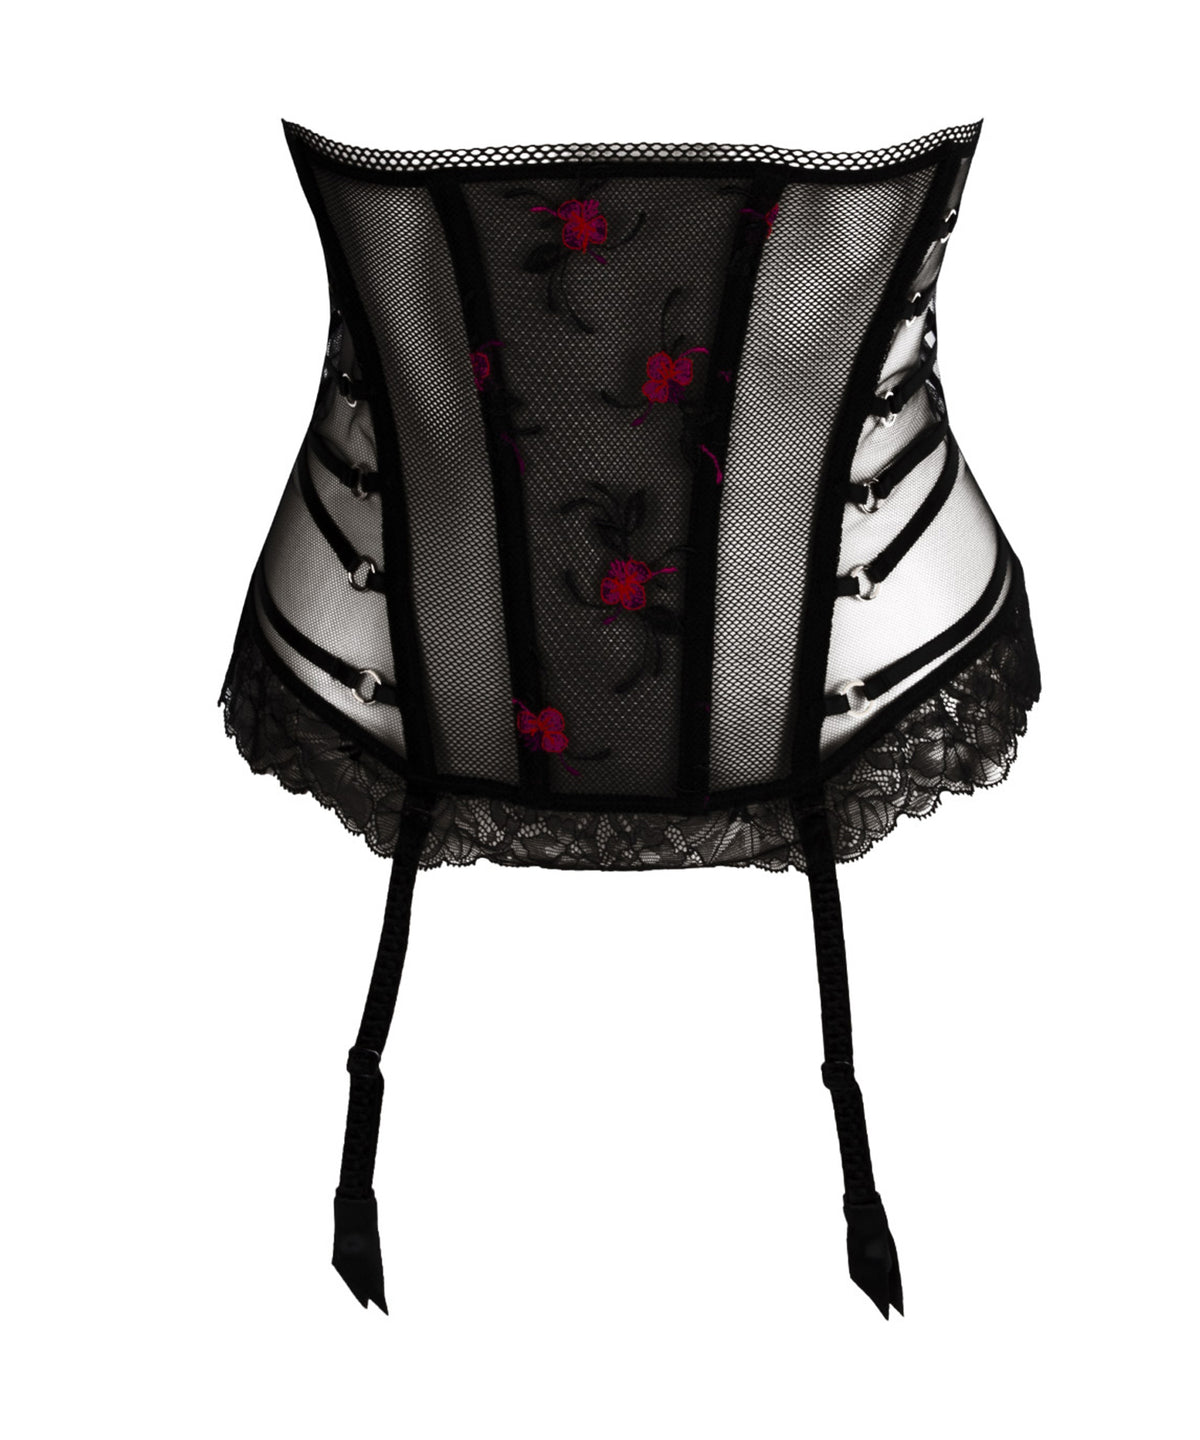 Corset top with Suspenders - L'Amoureuse